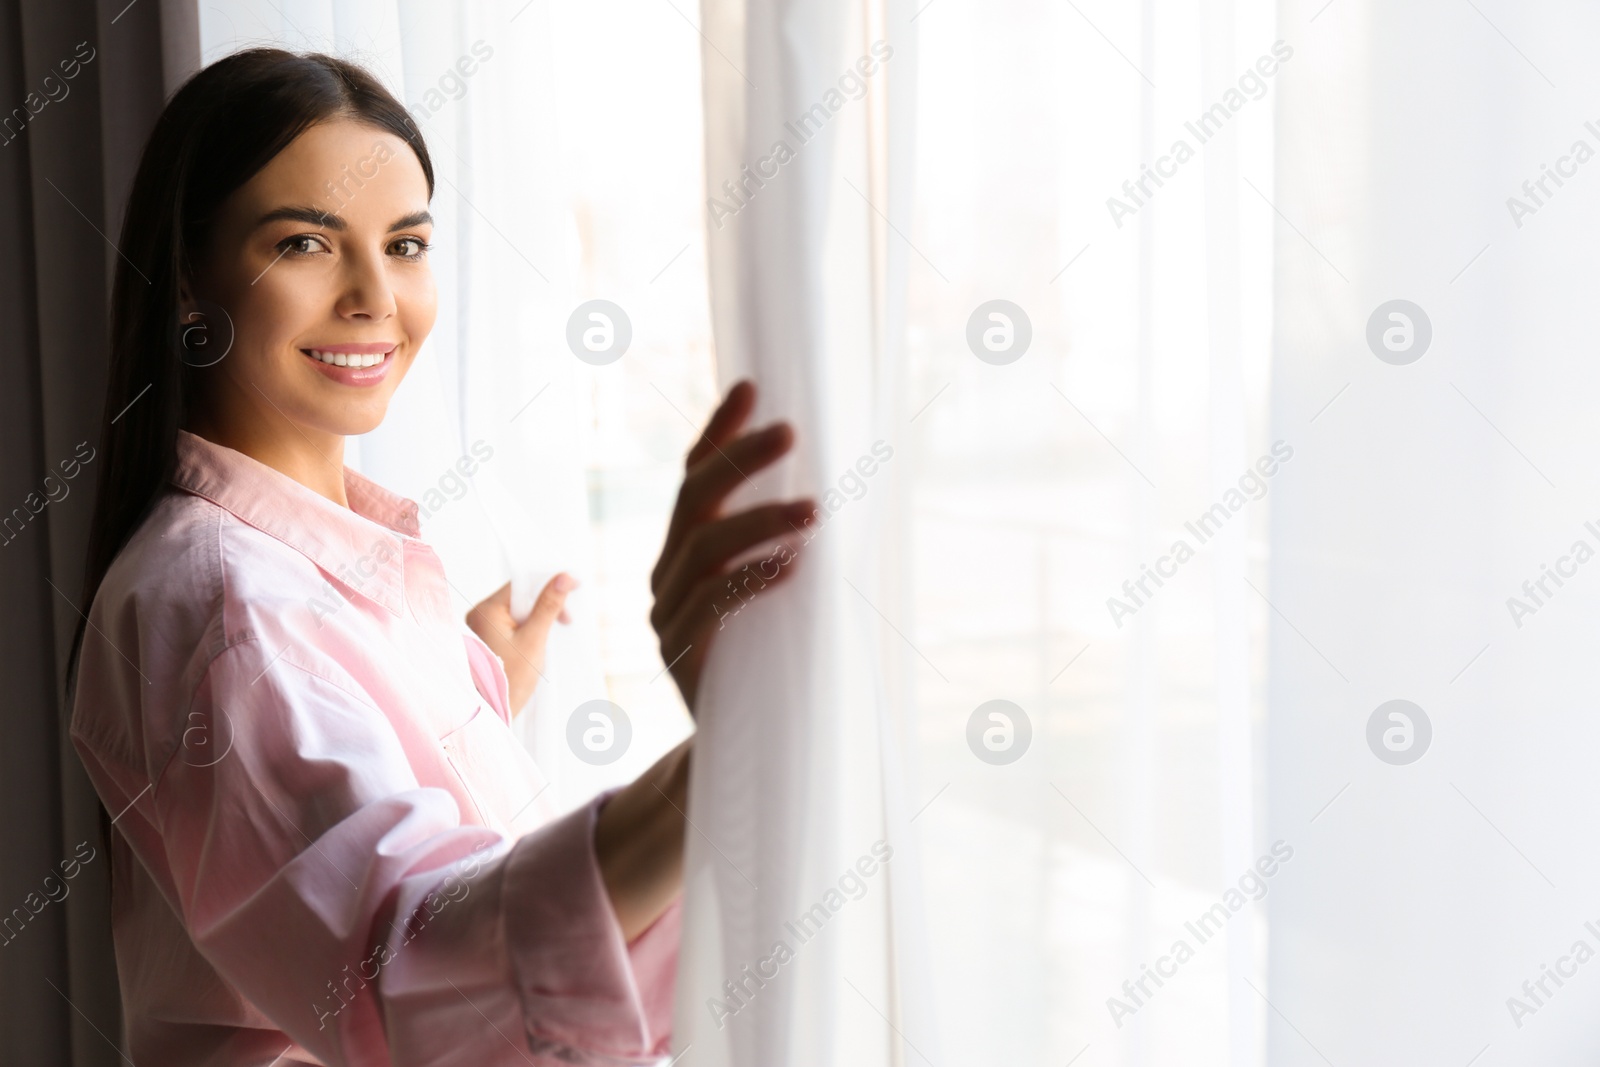 Photo of Woman opening window curtains at home in morning. Space for text